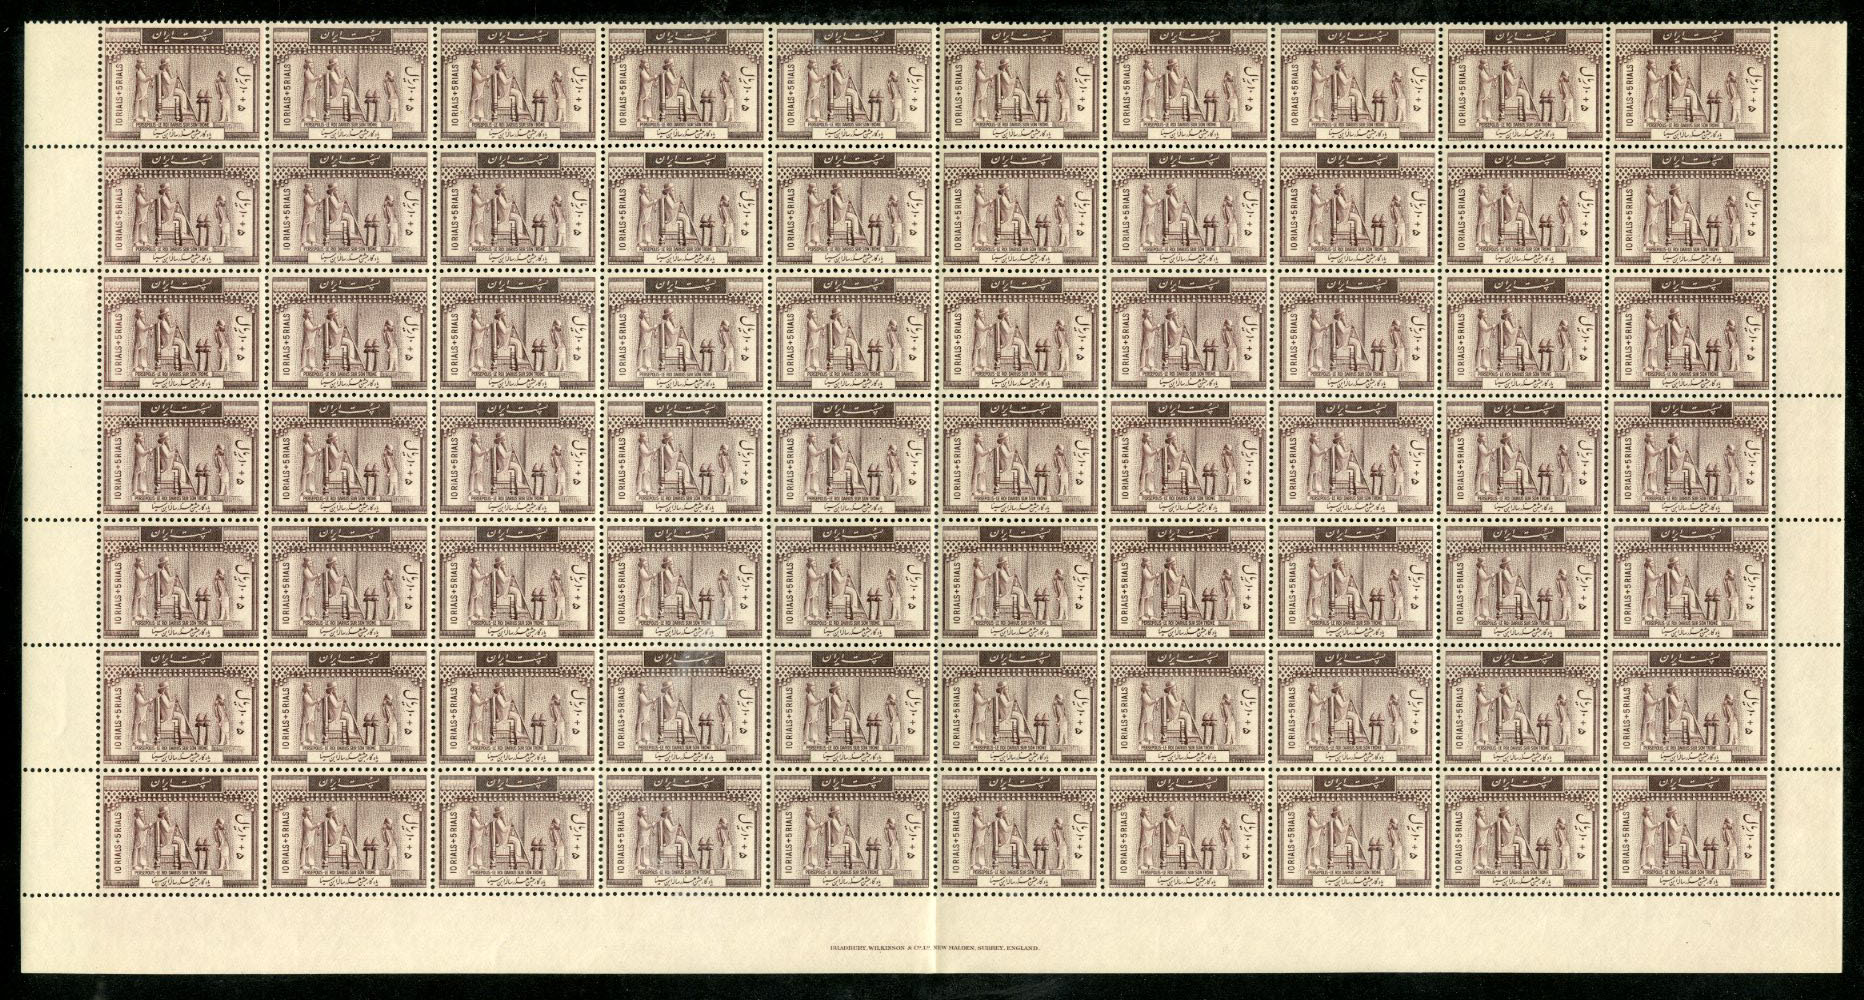 Lot 1476 - LARGE LOTS AND COLLECTIONS ROMANIA  -  Cherrystone Auctions U.S. & Worldwide Stamps & Postal History